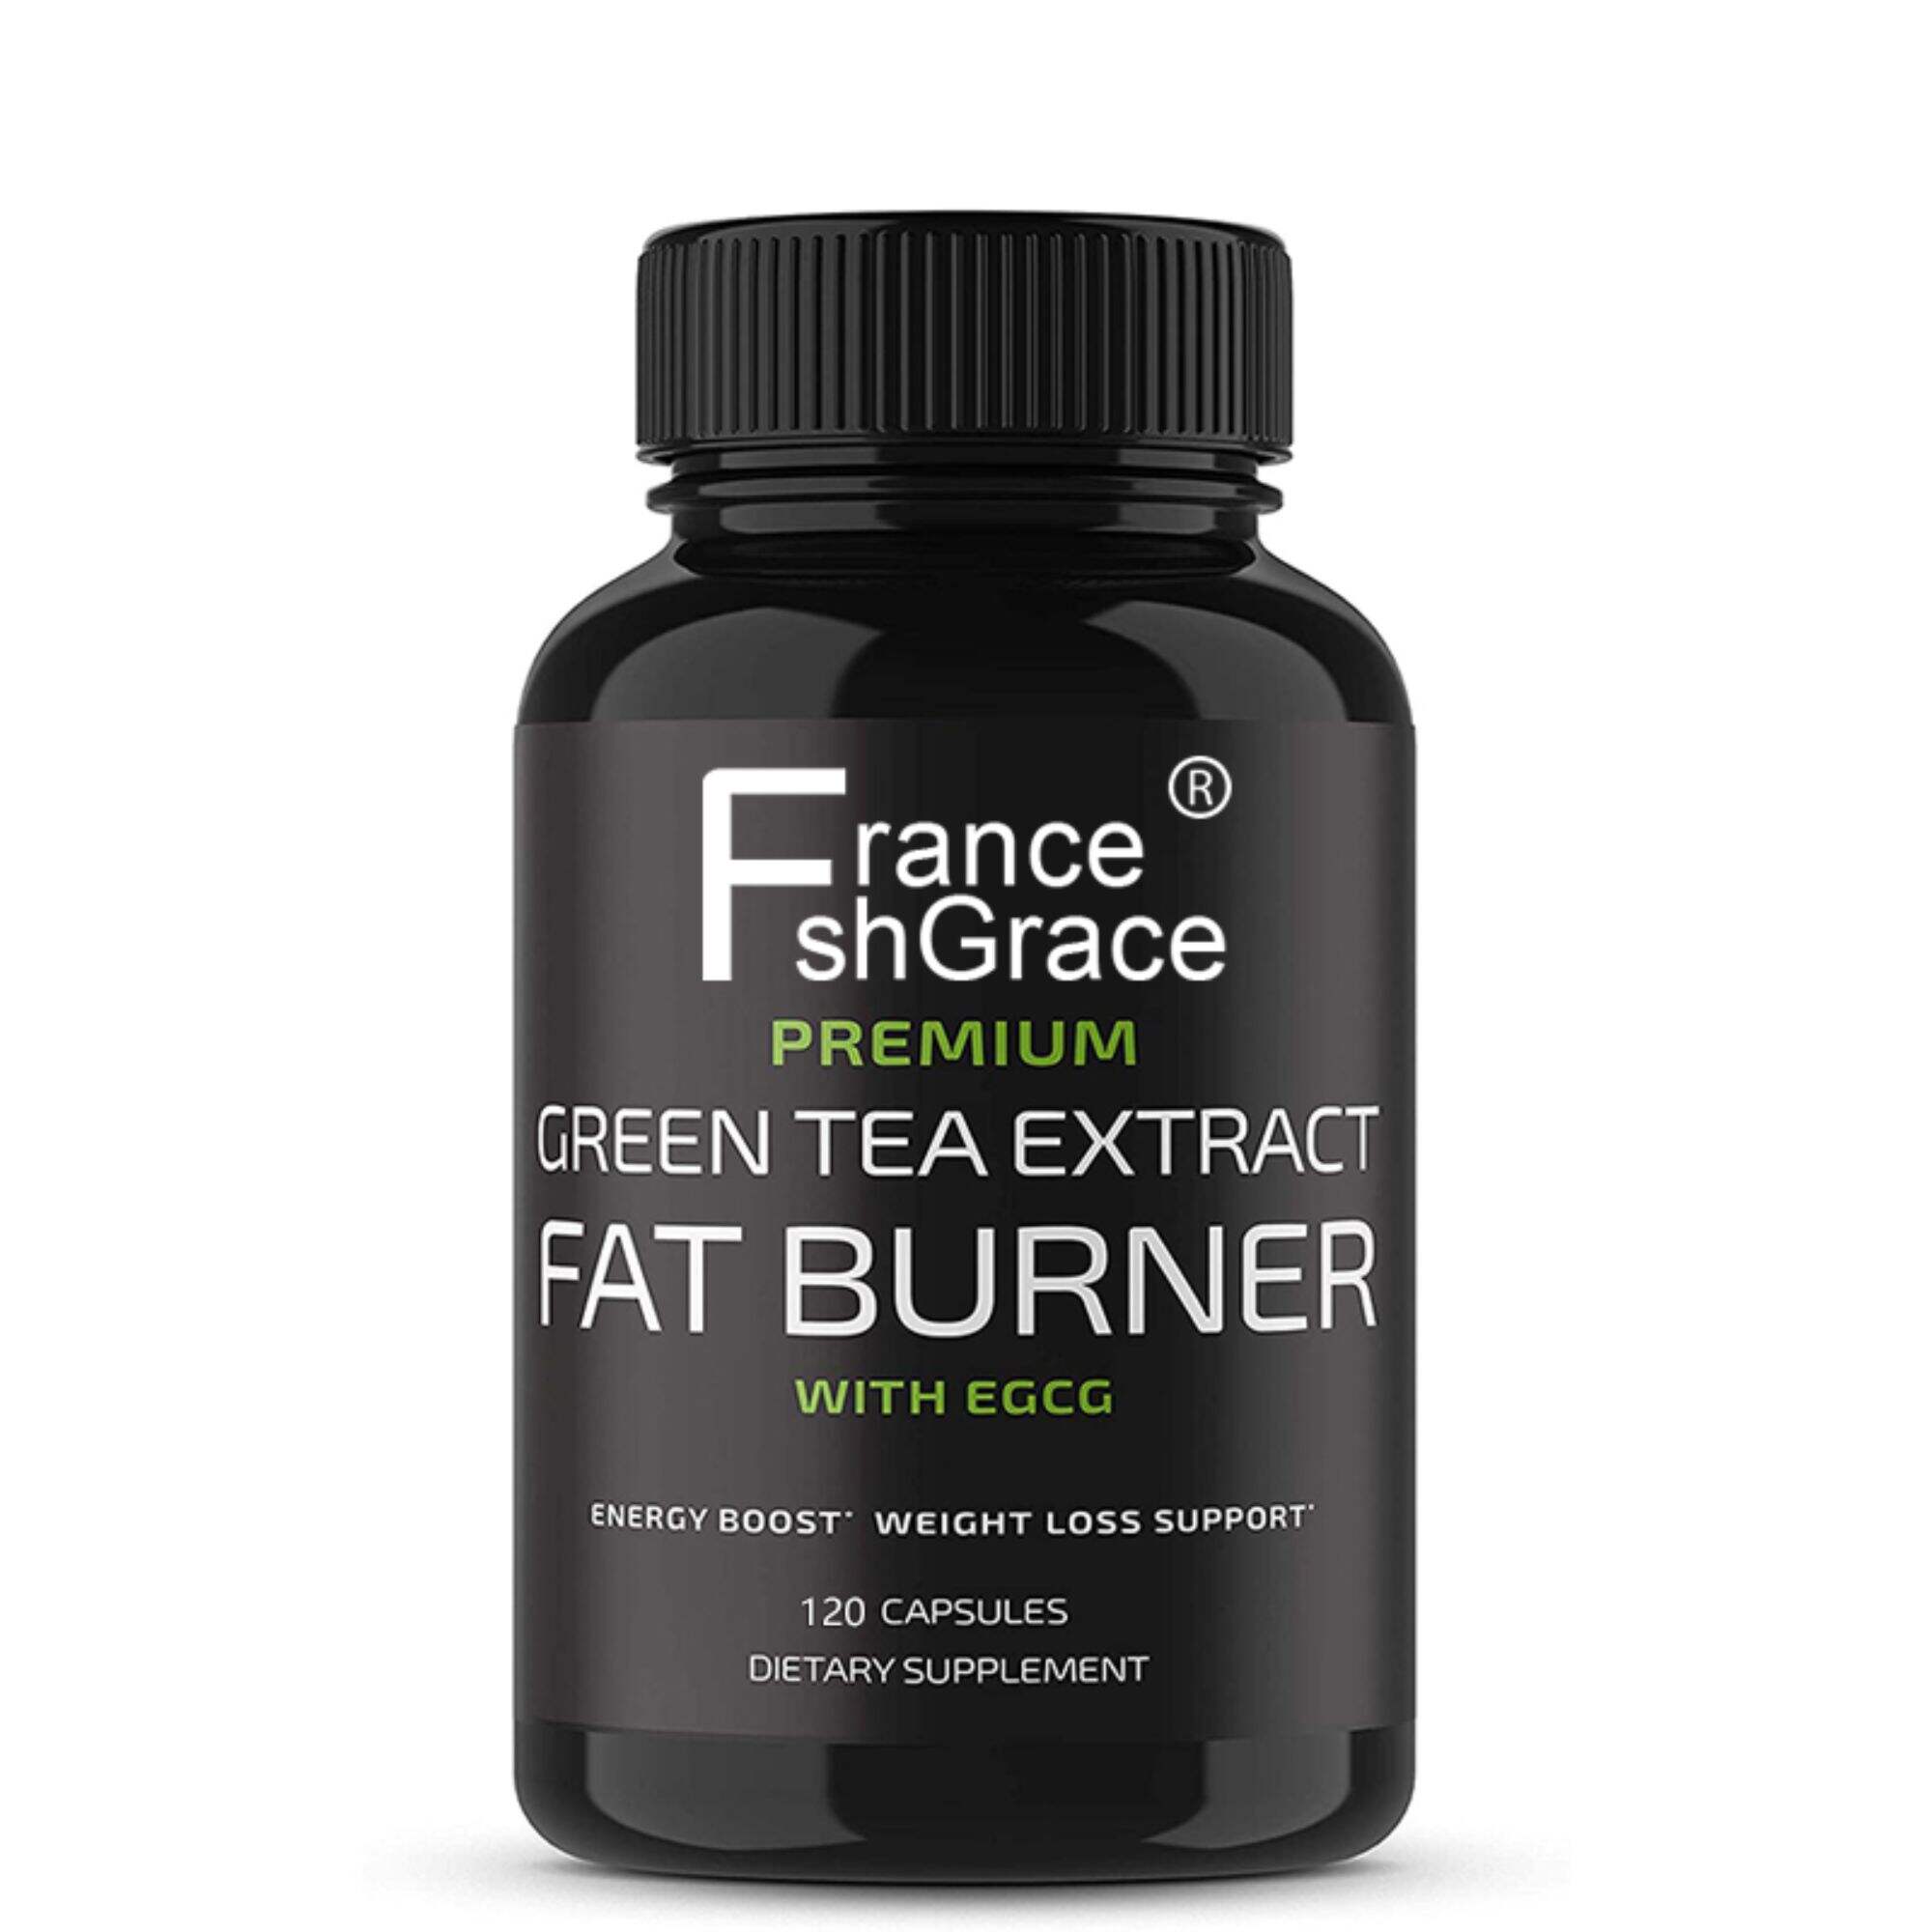 Green Tea Extract Fat Burner with EGCG, 60 Capsules